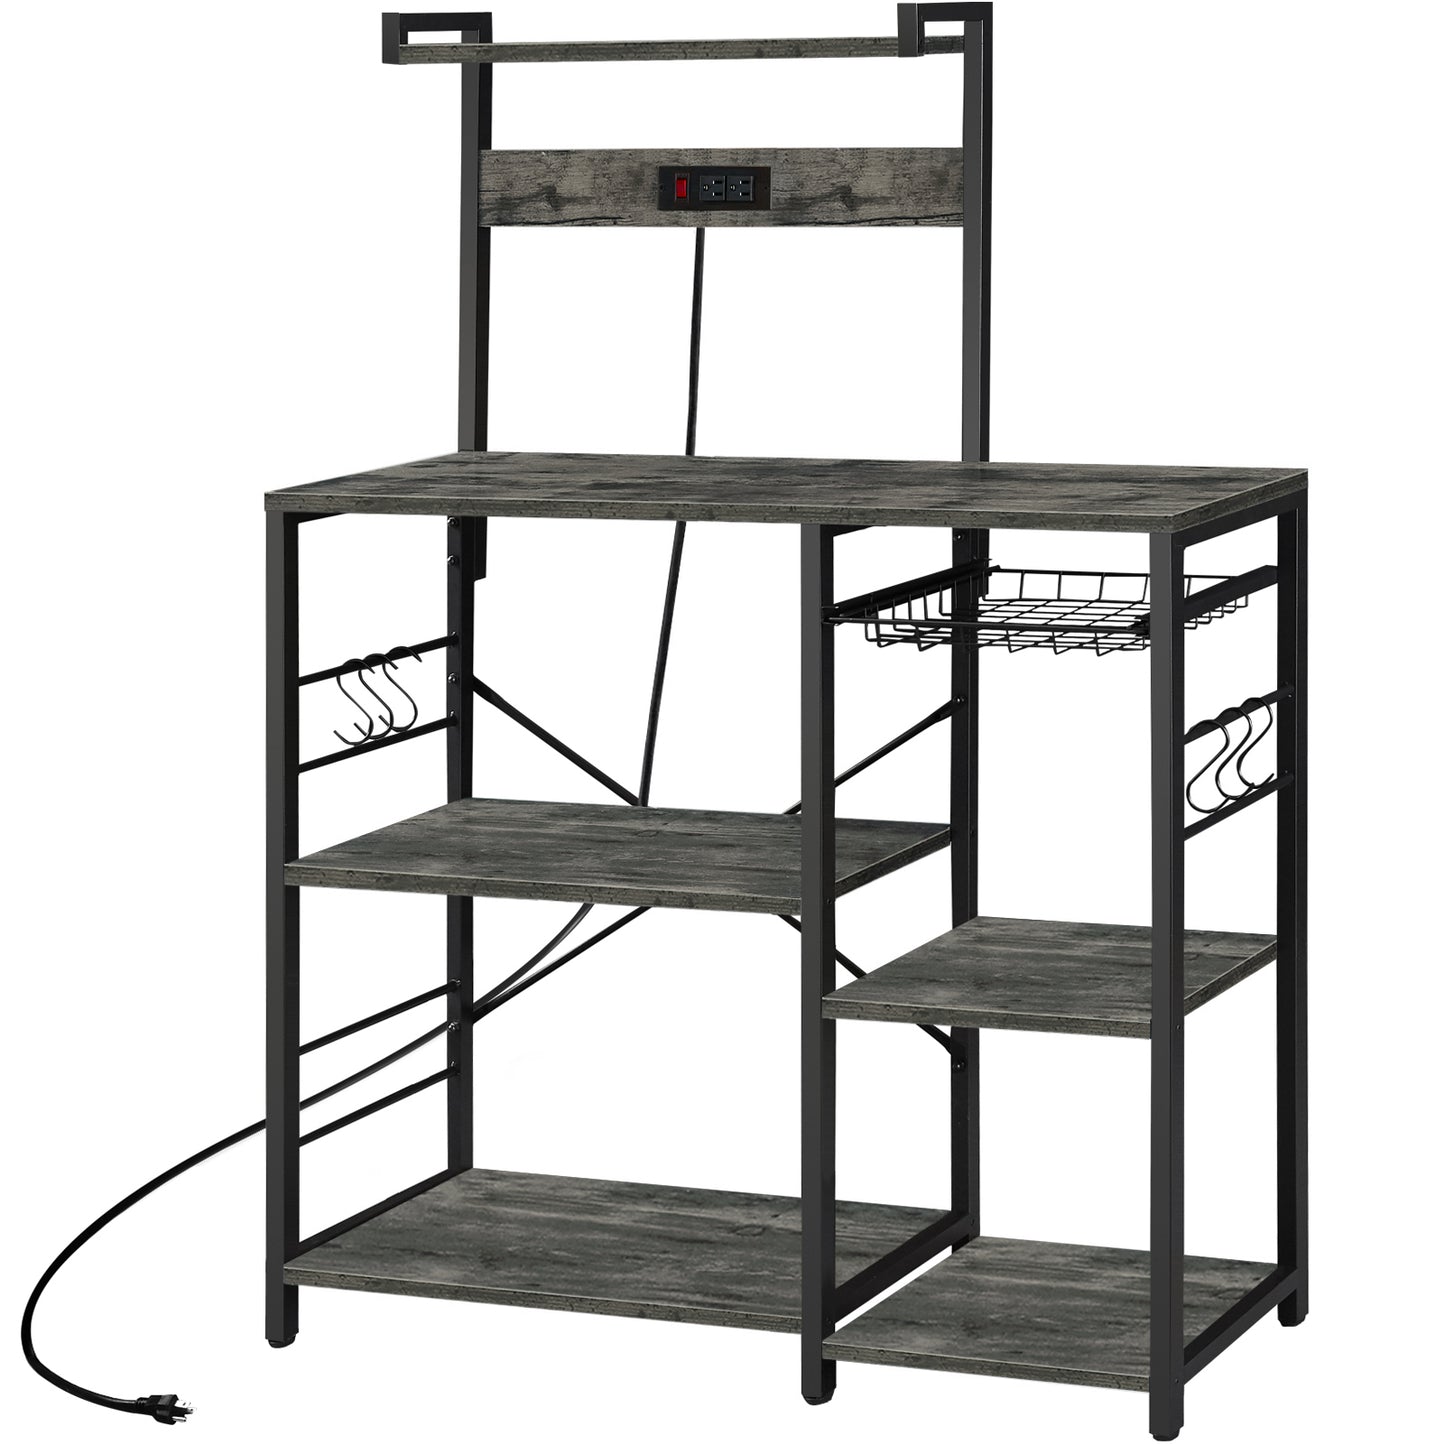 SUPERJARE Bakers Rack with Power Outlet, Microwave Stand, Coffee Bar with Wire Basket, Kitchen Storage Rack with 6 S-Hooks, Charcoal Gray